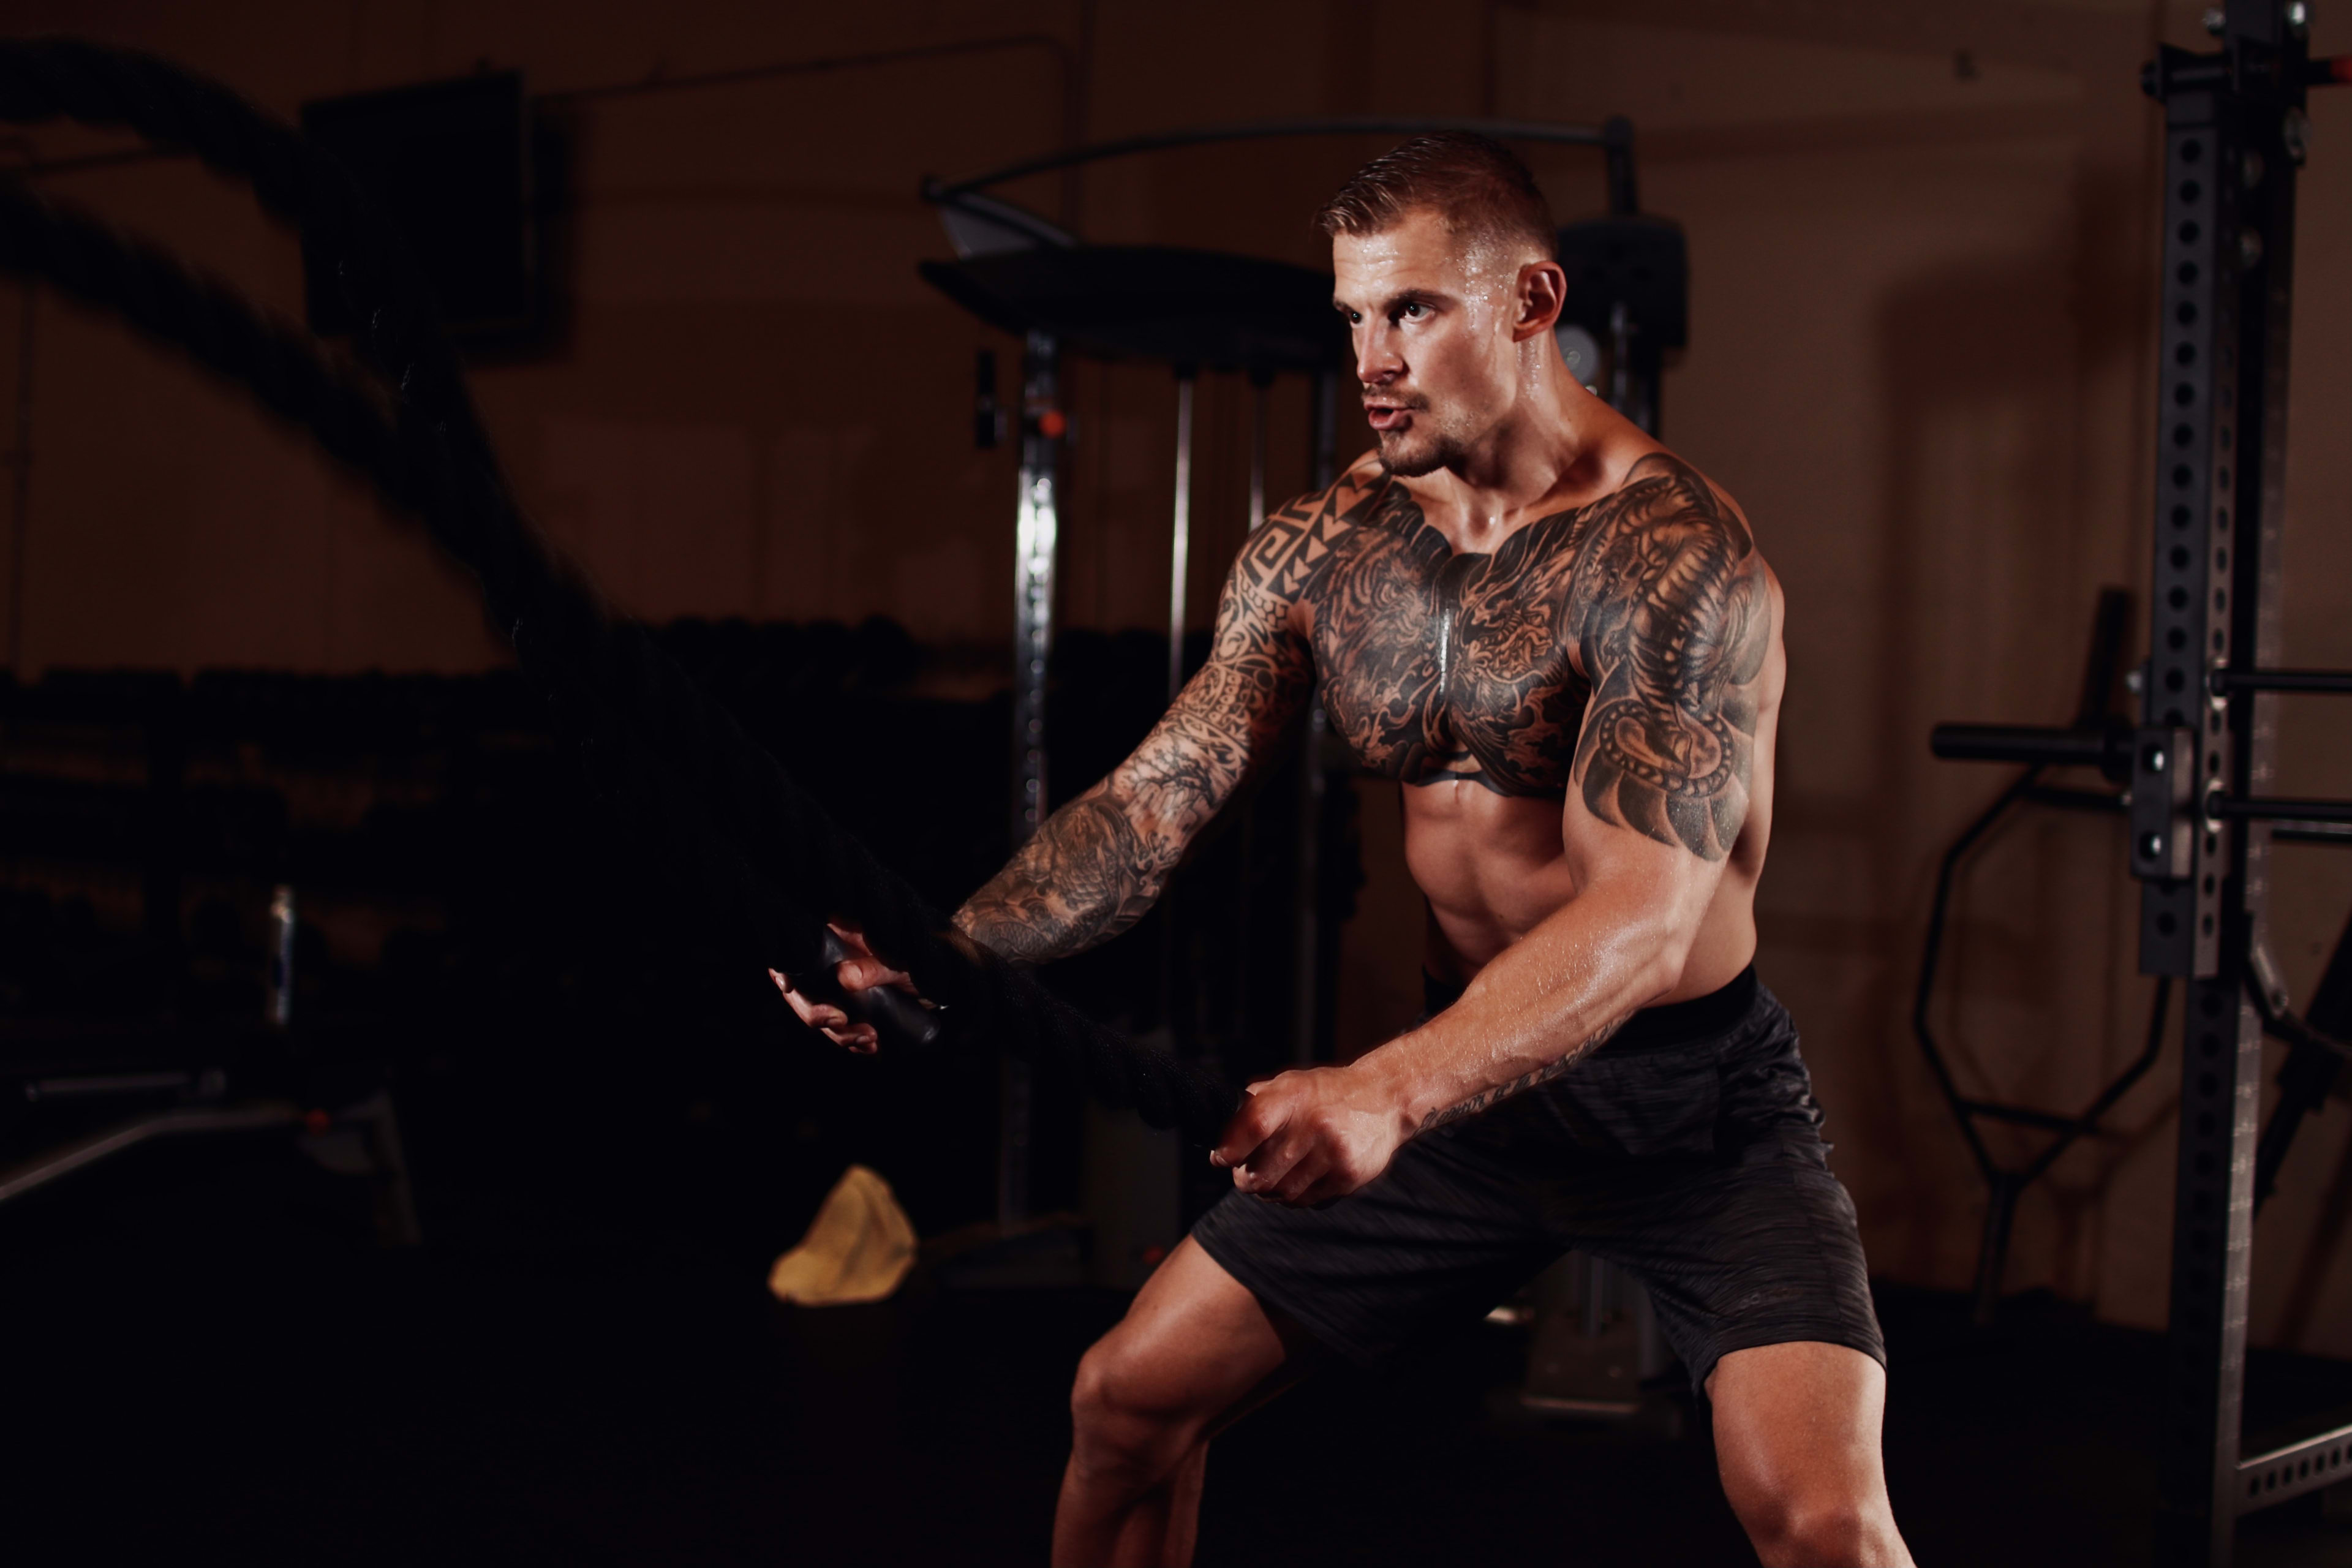 A man with a tattoo on his arm posing for a fitness photoshoot.